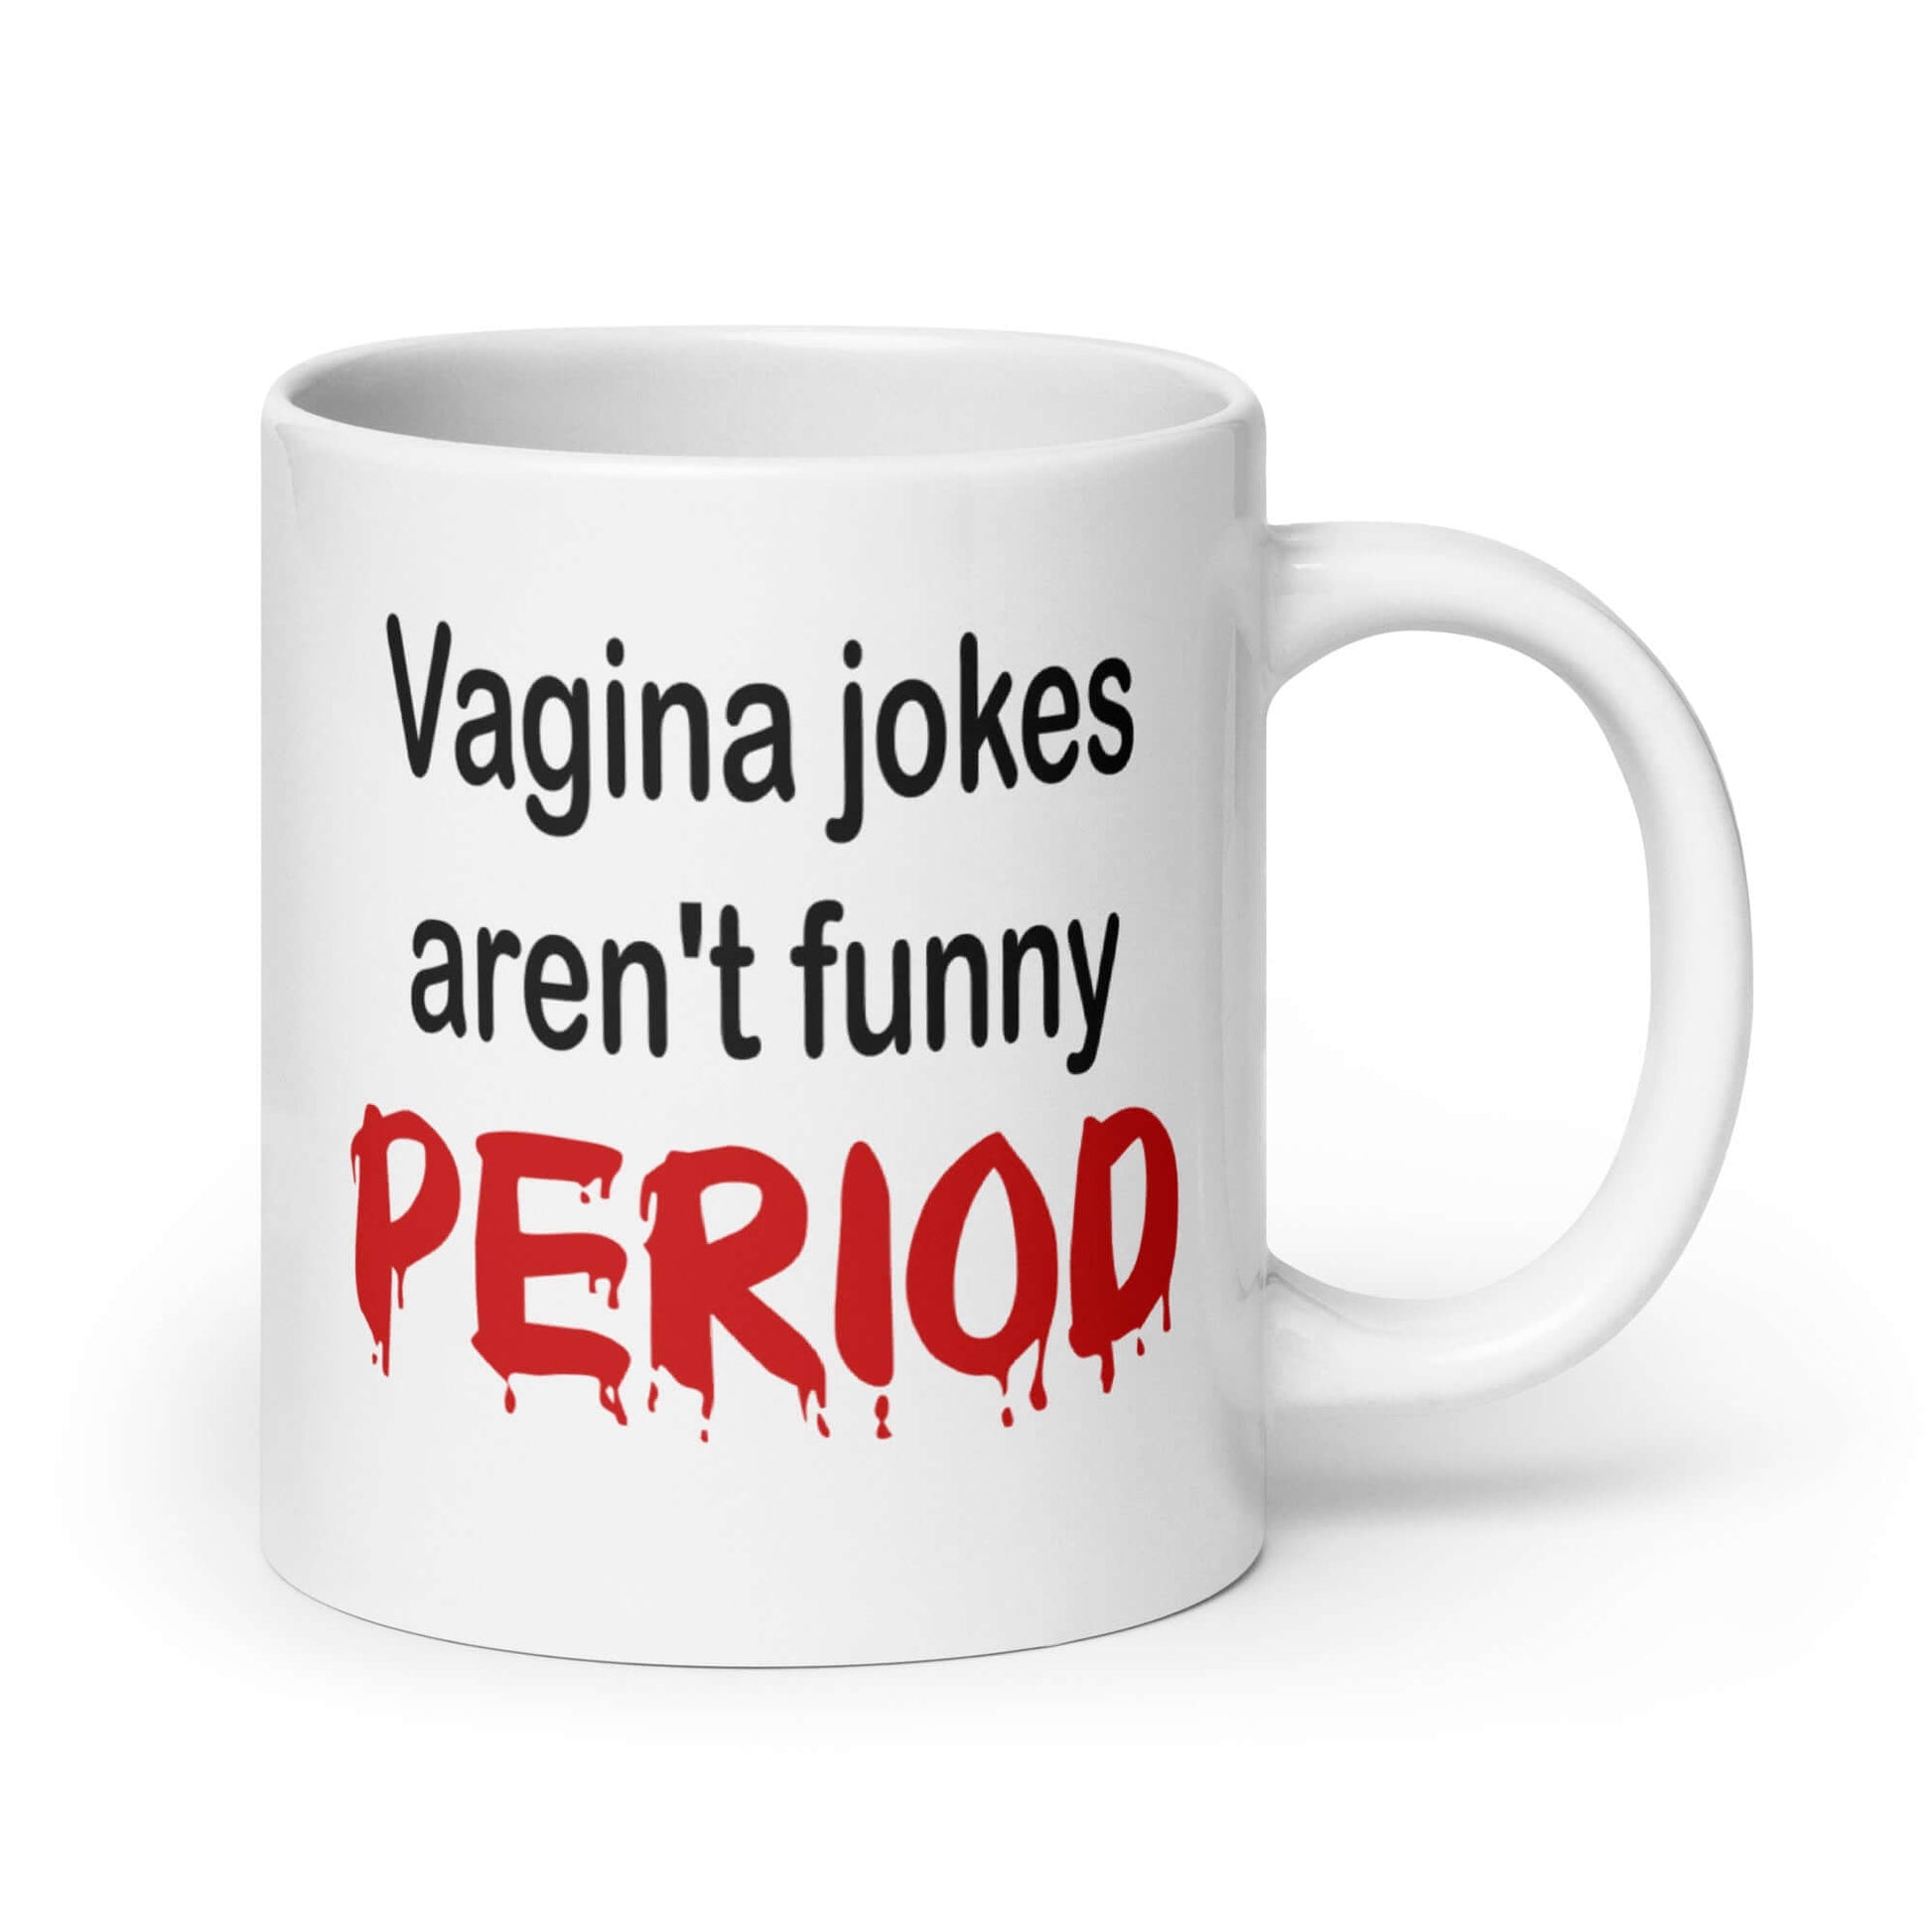 White ceramic coffee mug with the crude phrase Vagina jokes aren't funny period. The word period is in a red drippy font. The graphics are printed on both sides of the mug.